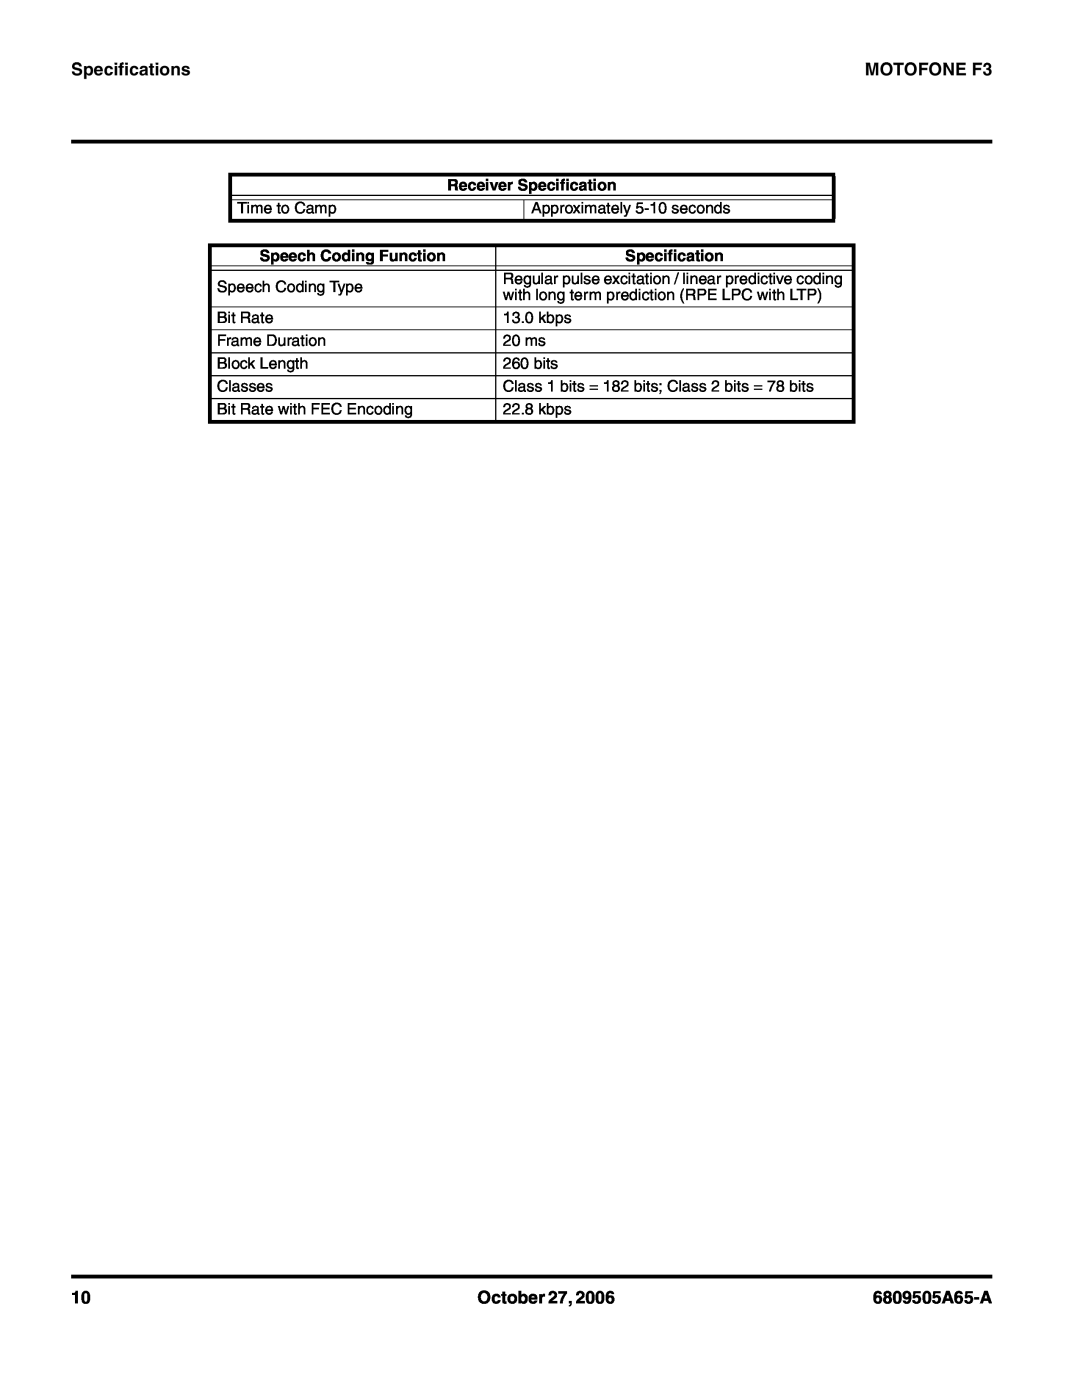 Motorola service manual Specifications, MOTOFONE F3, October 27, 6809505A65-A, Time to Camp 